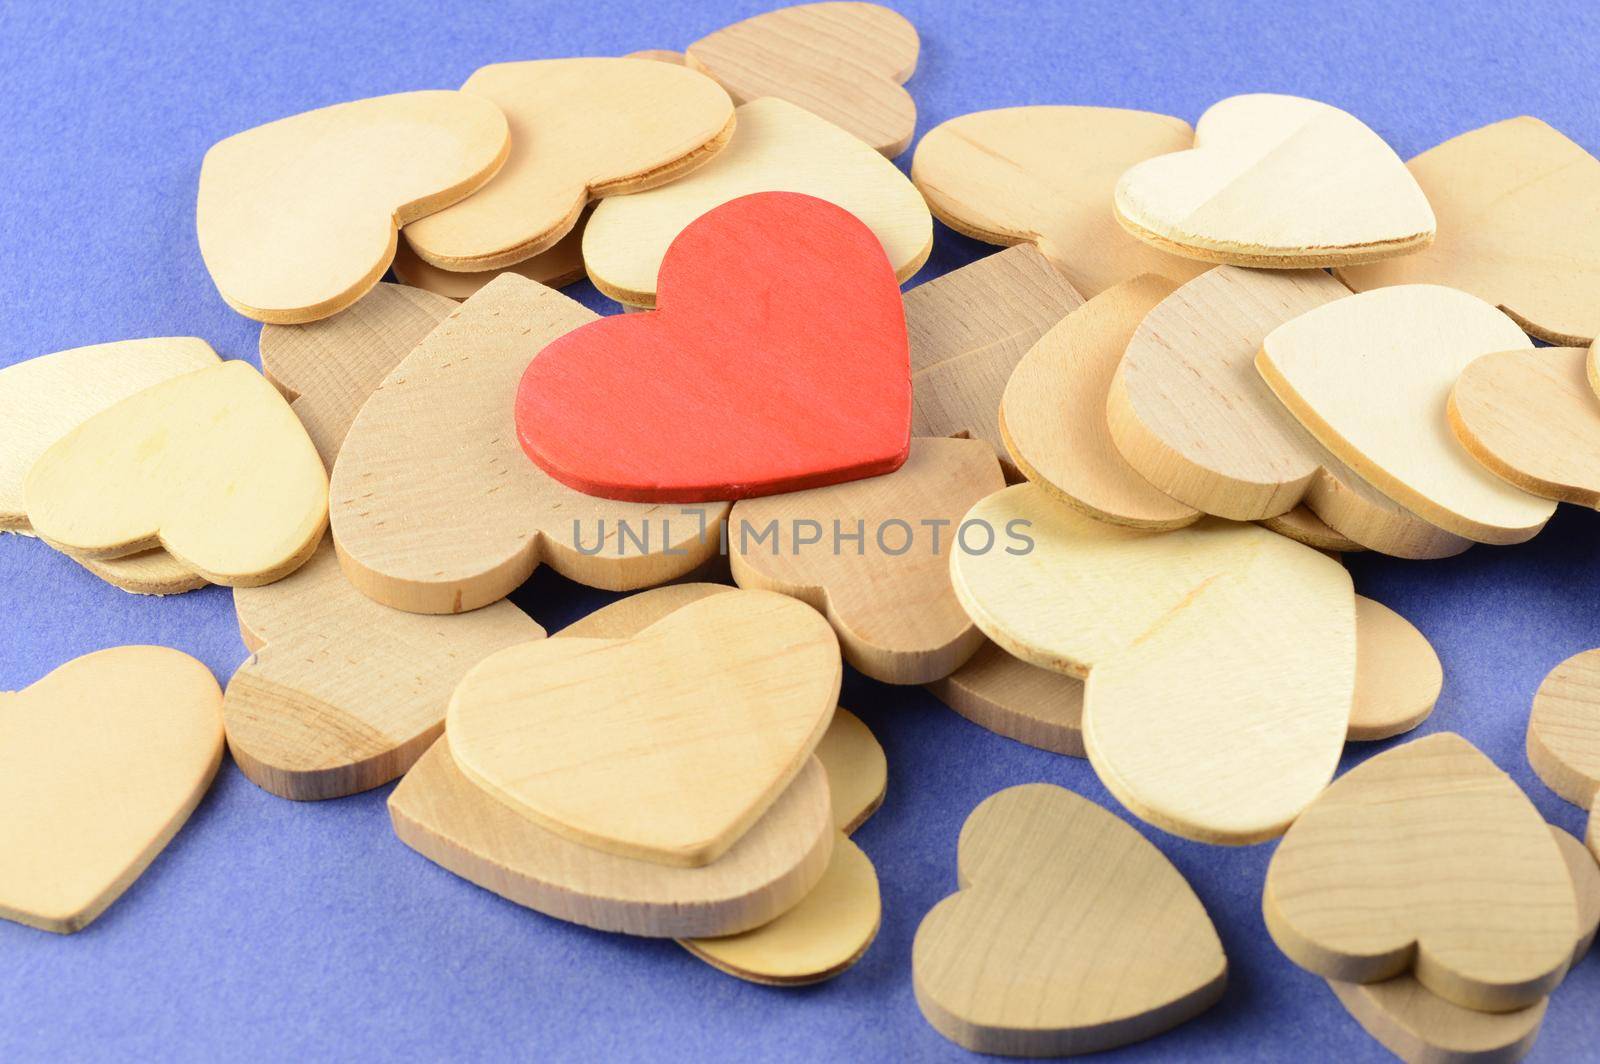 A red wood heart is singled out over top all the other uncolored wood shaped hearts.